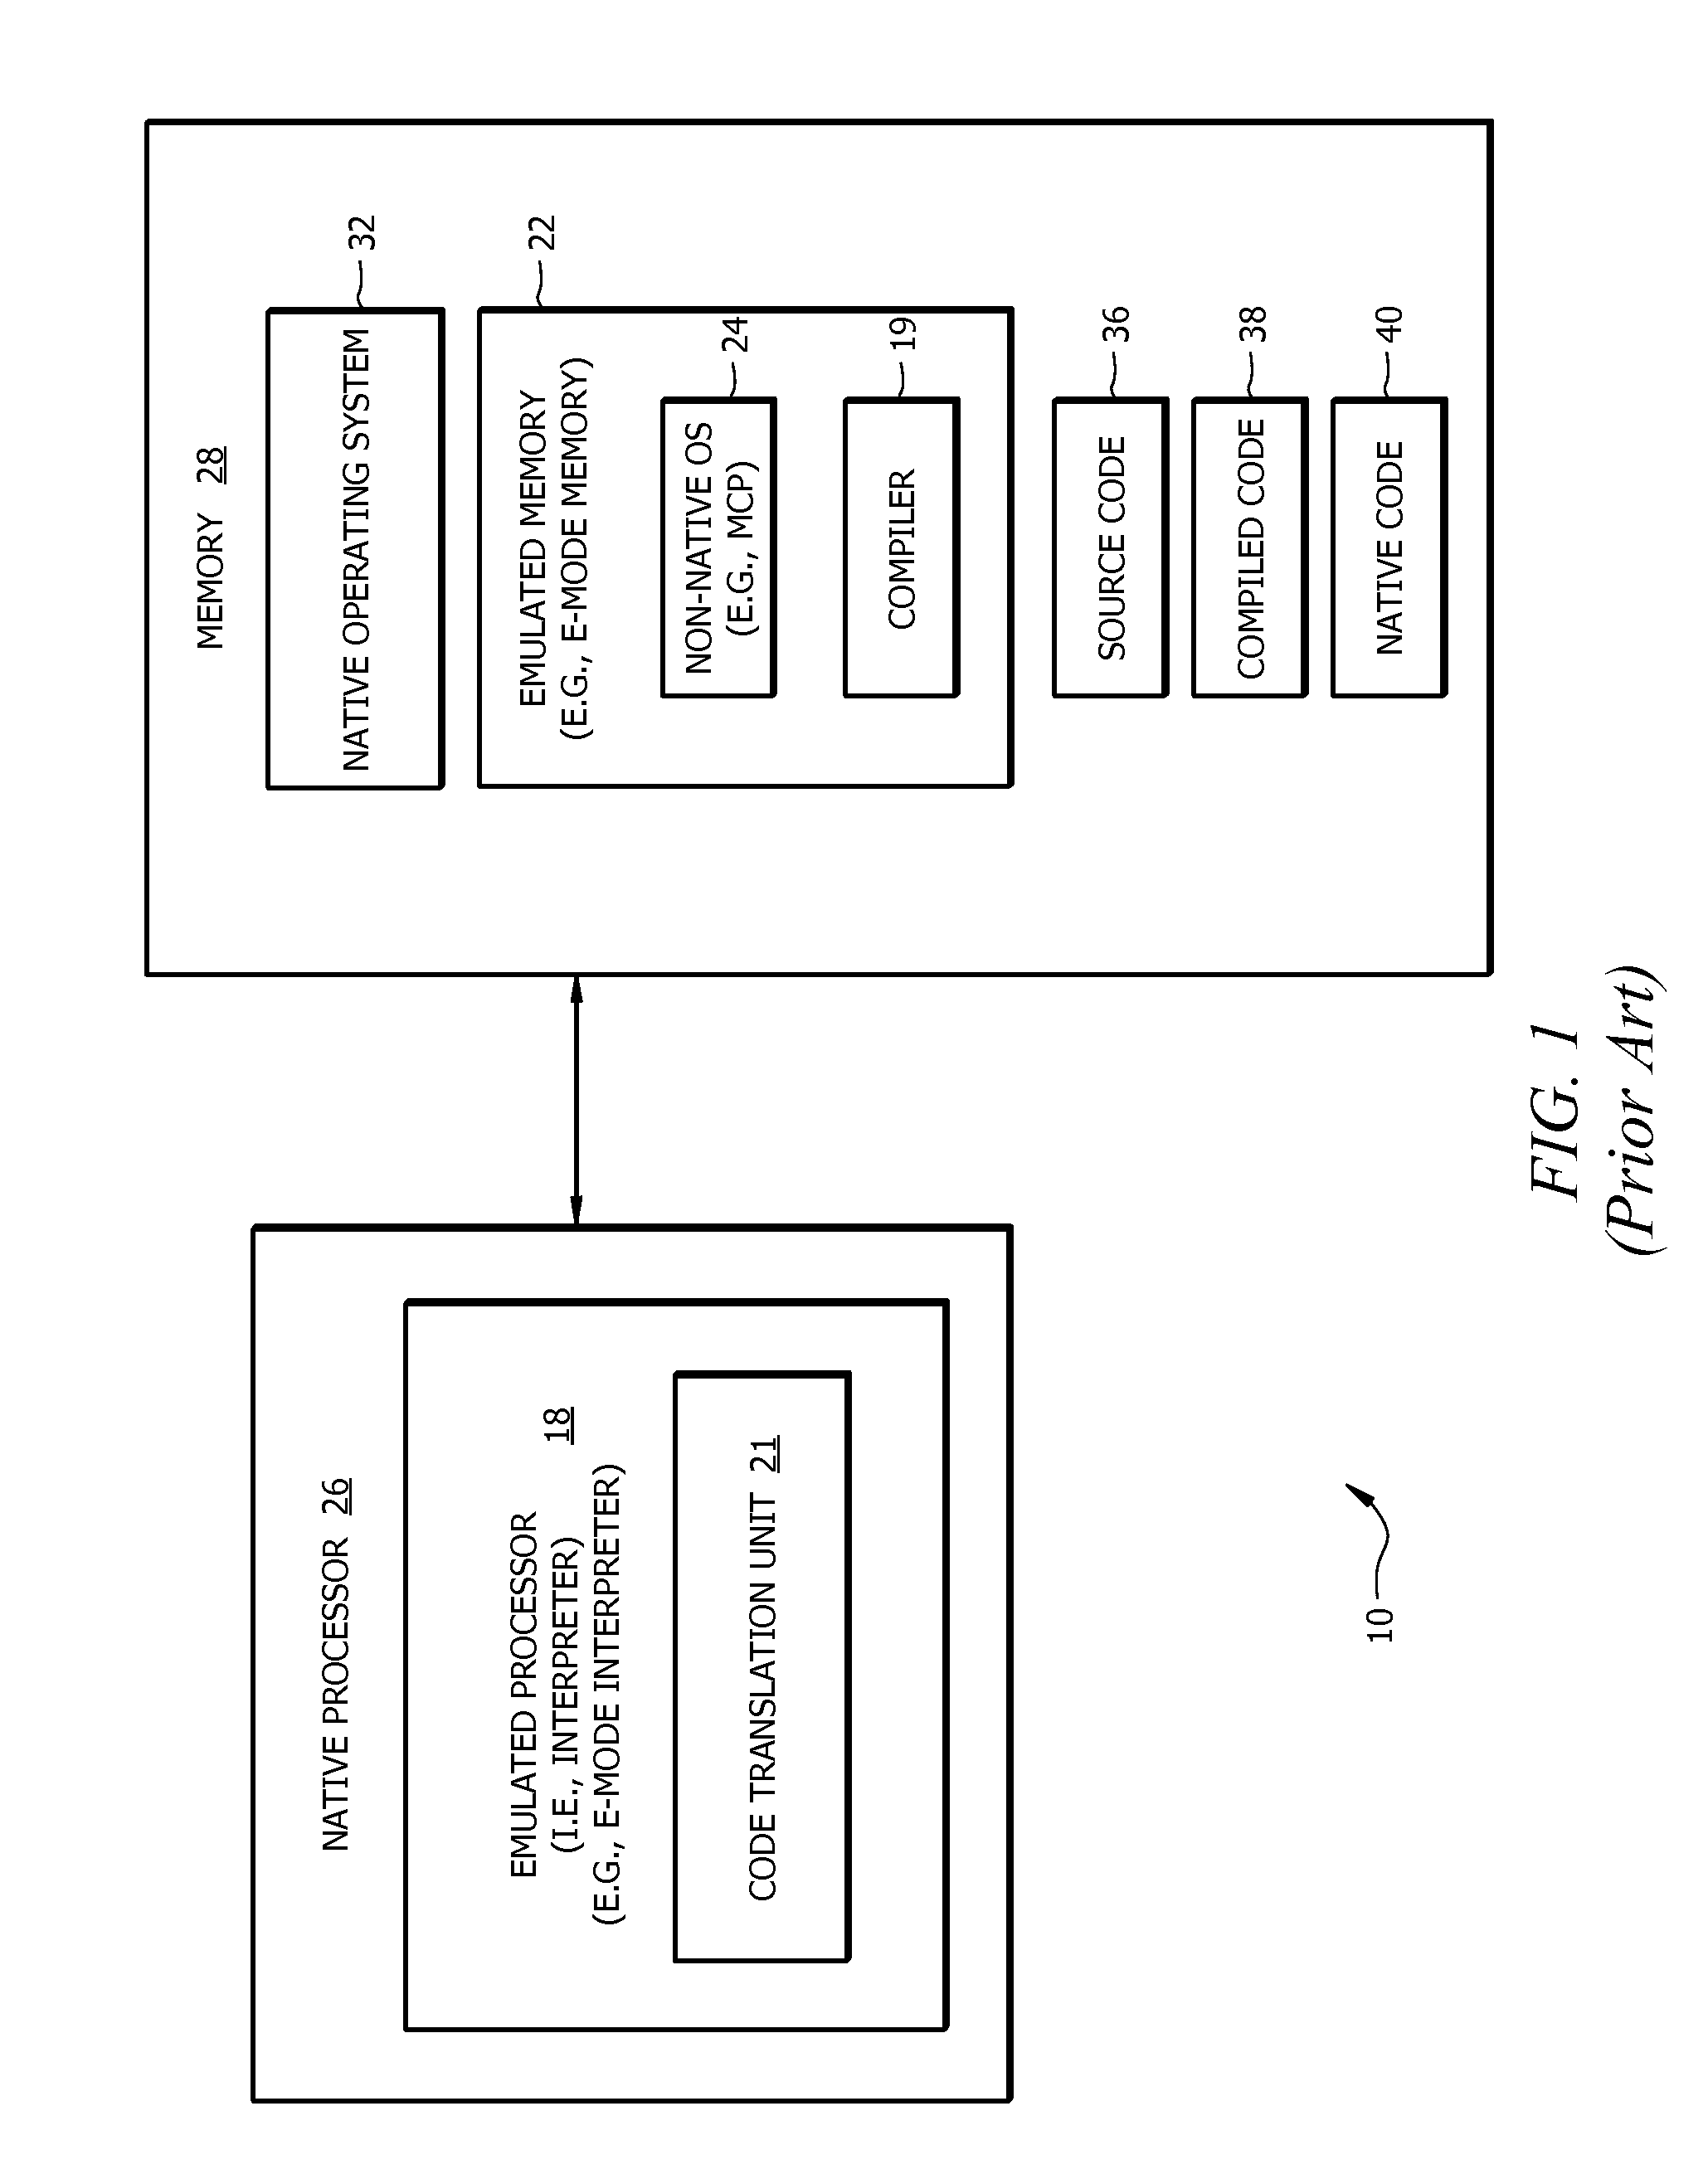 Multi-modal compiling apparatus and method for generating a hybrid codefile